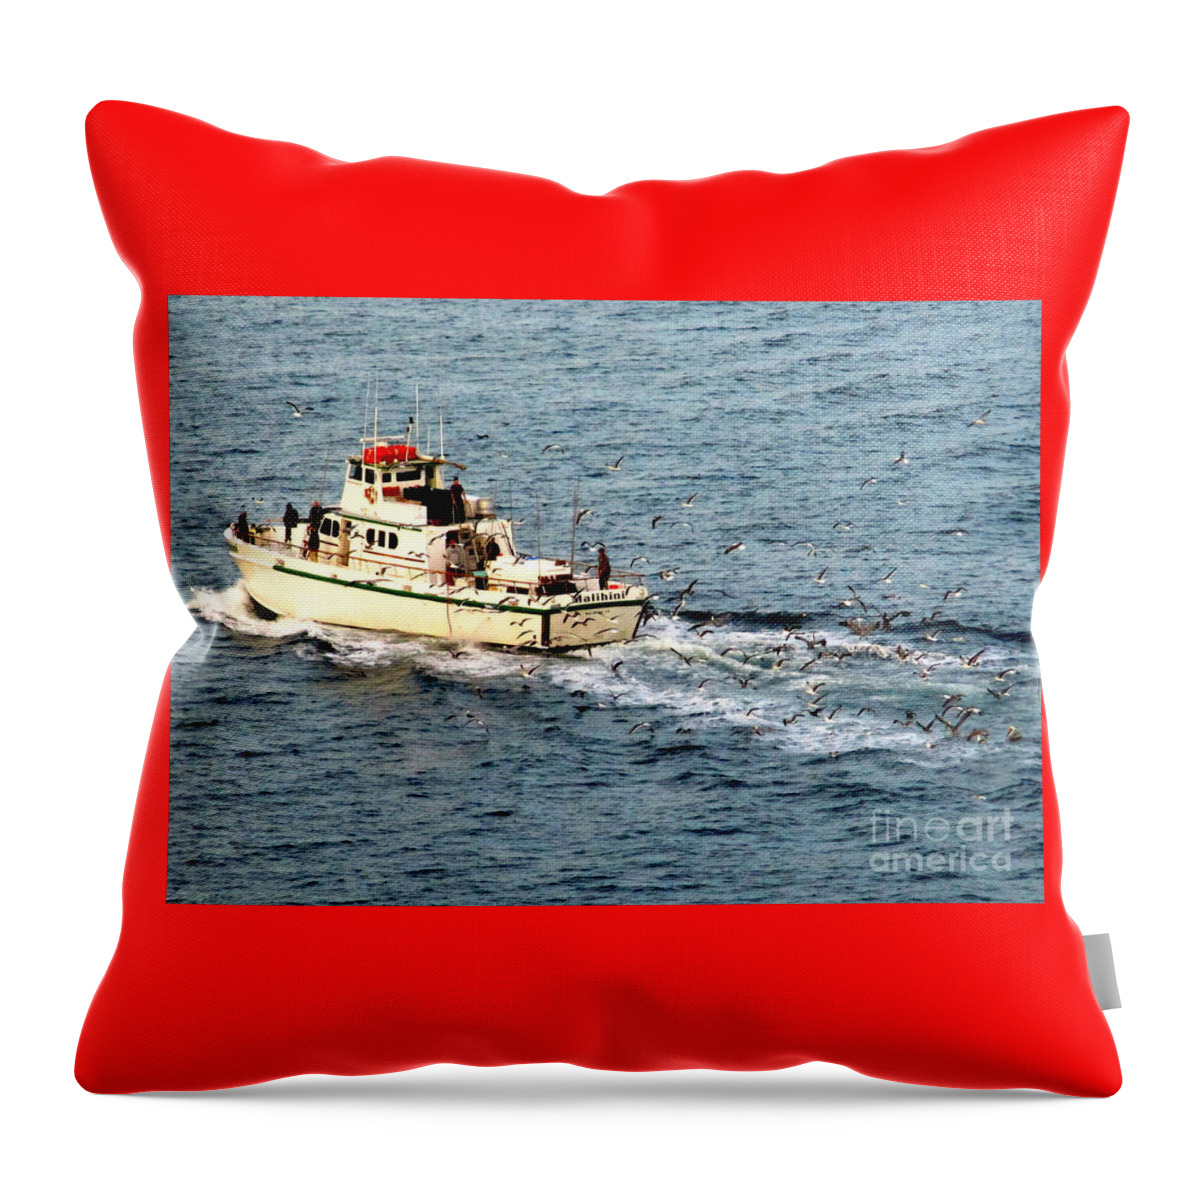 Fishing Throw Pillow featuring the photograph Fishing And Seagulls by Randall Weidner